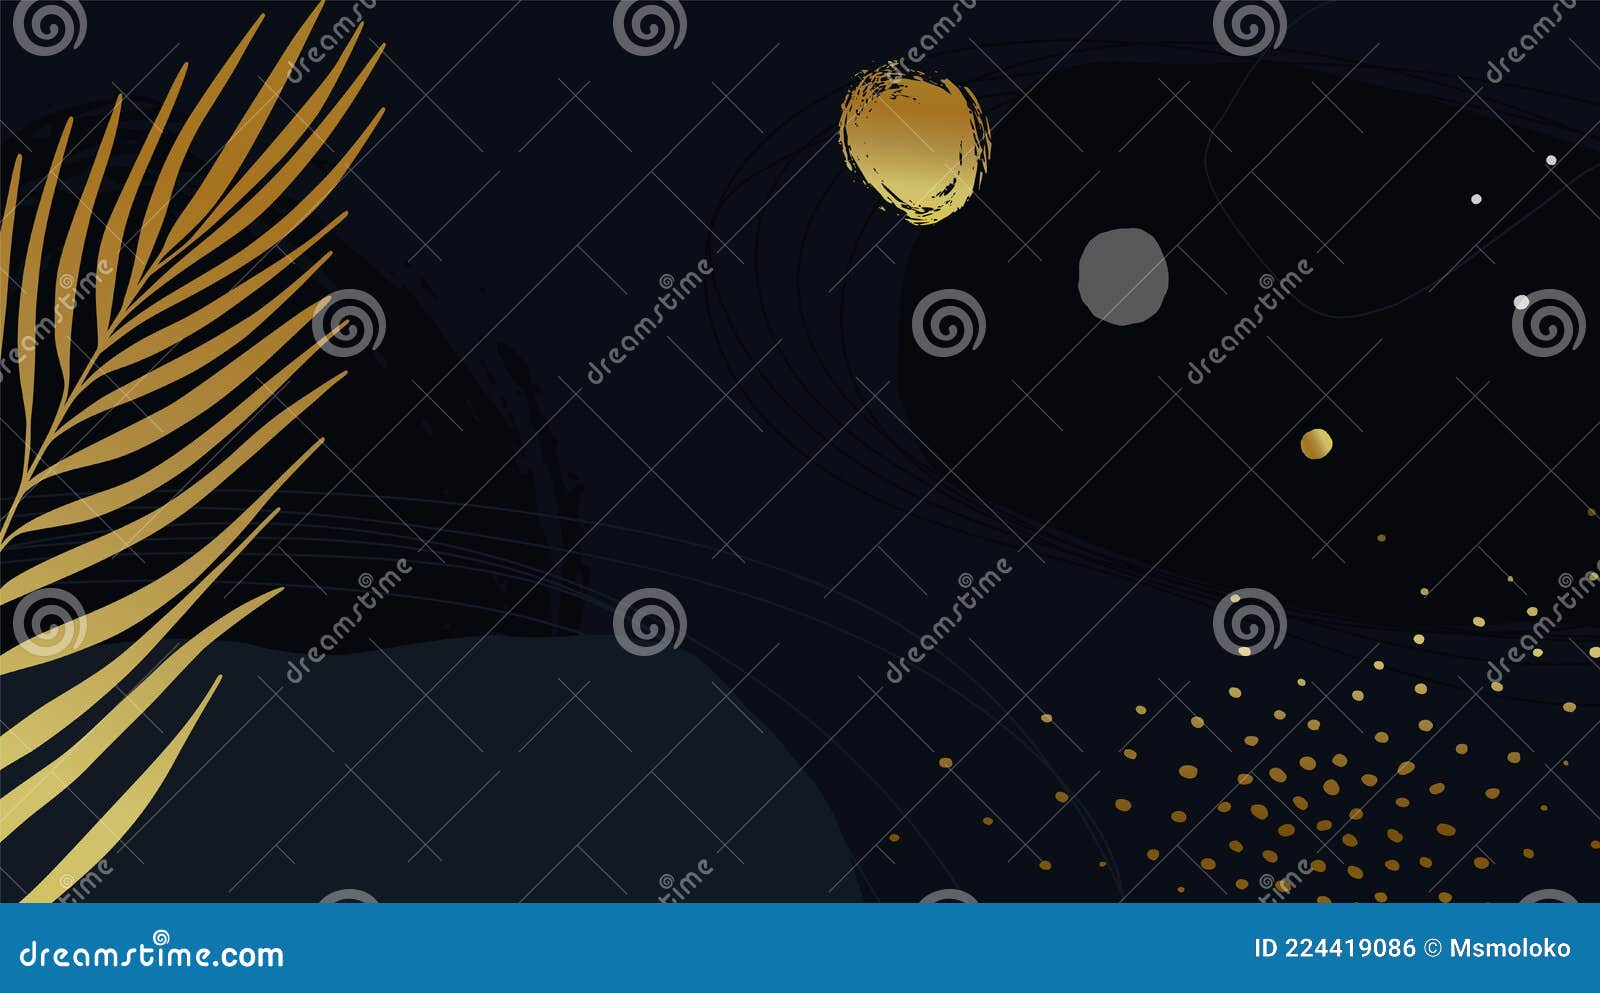 Dark Blue Artistic Background with Gold Details and Palm Leaf. Vector